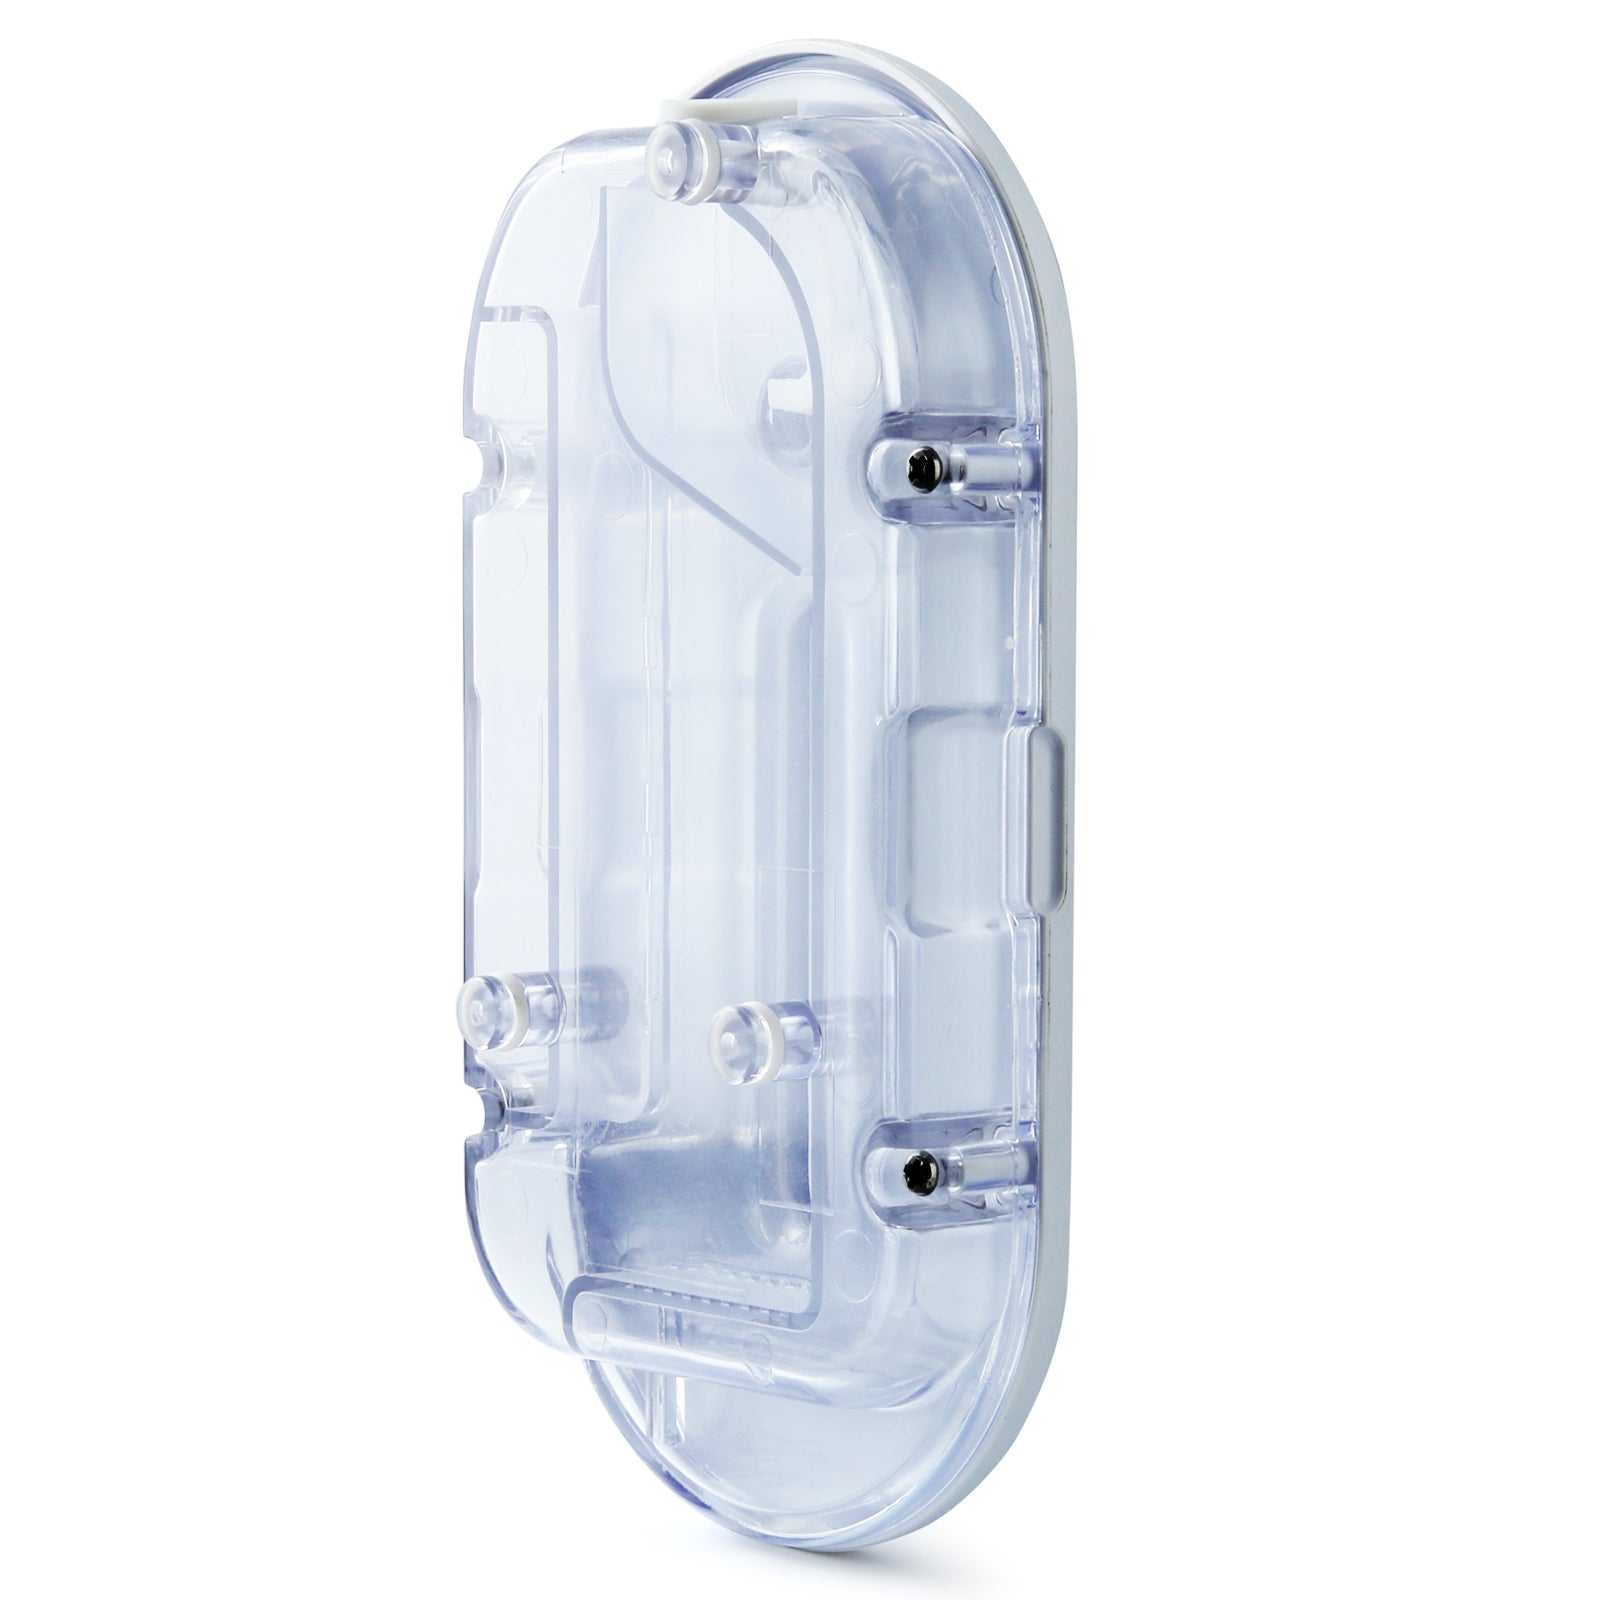 OSITO Replacement Water Tank for Oxygen Concentrator Machine AST-809